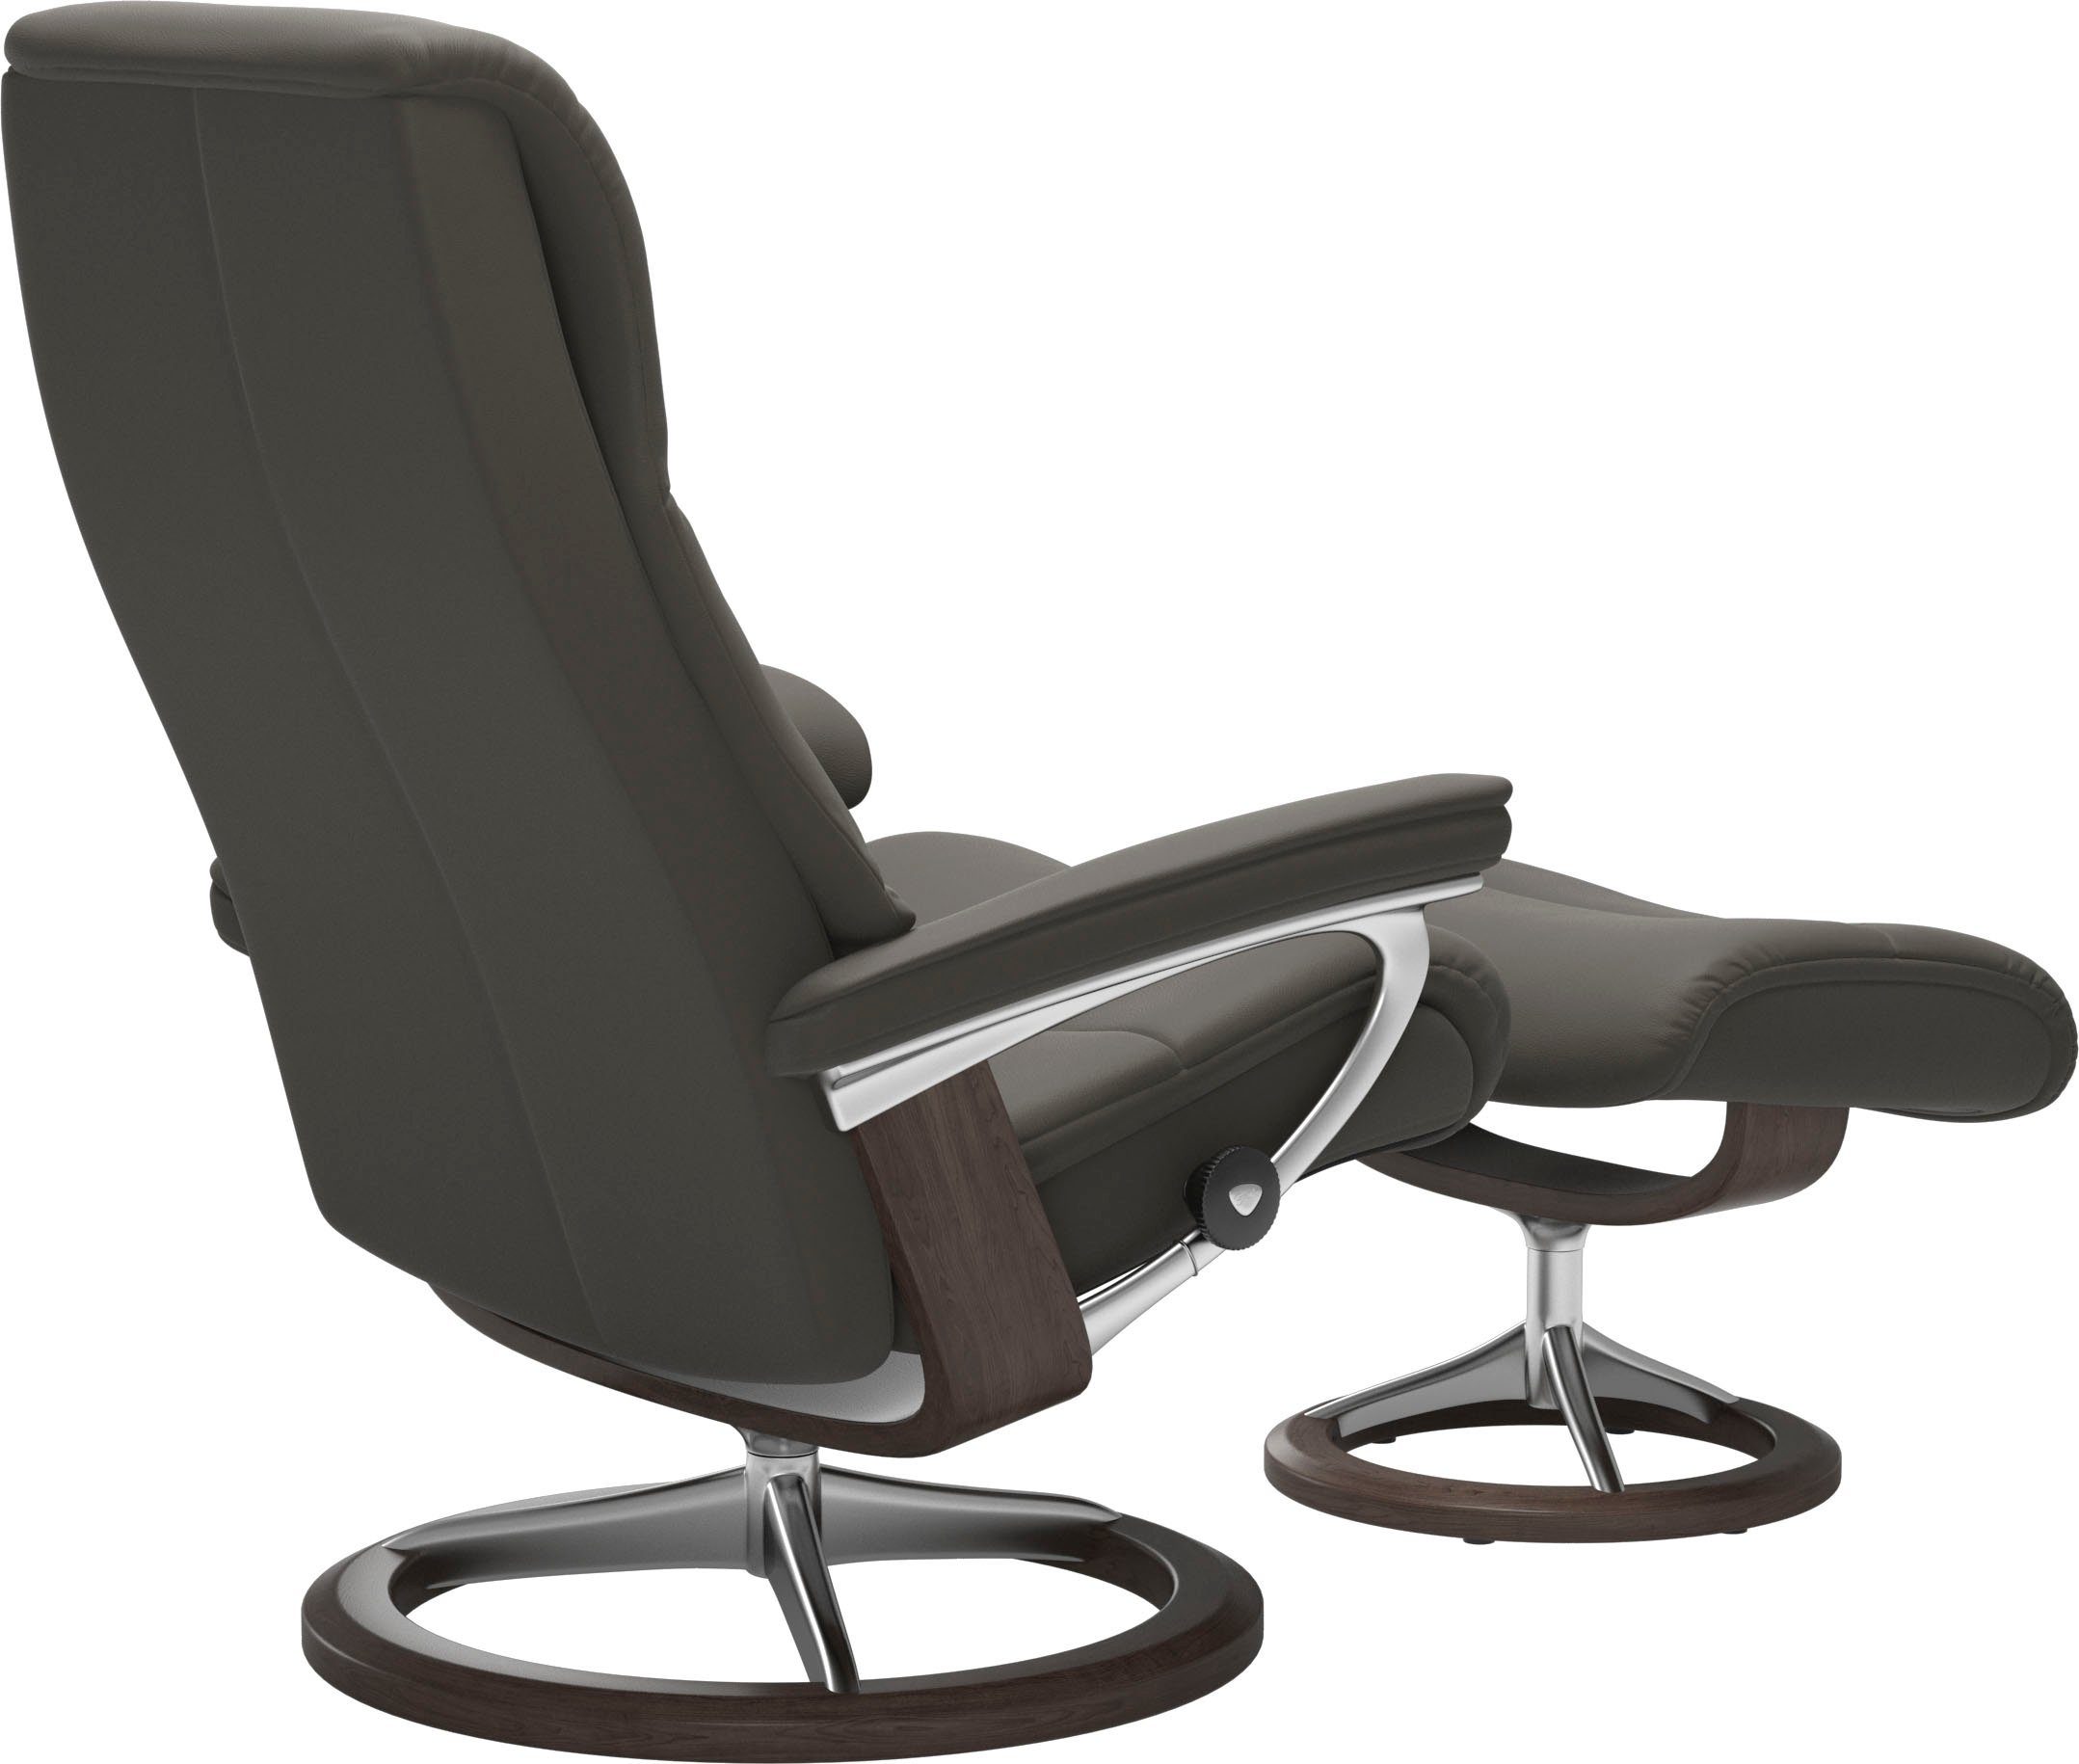 Wenge Base, Größe View, Signature S,Gestell Stressless® Relaxsessel mit